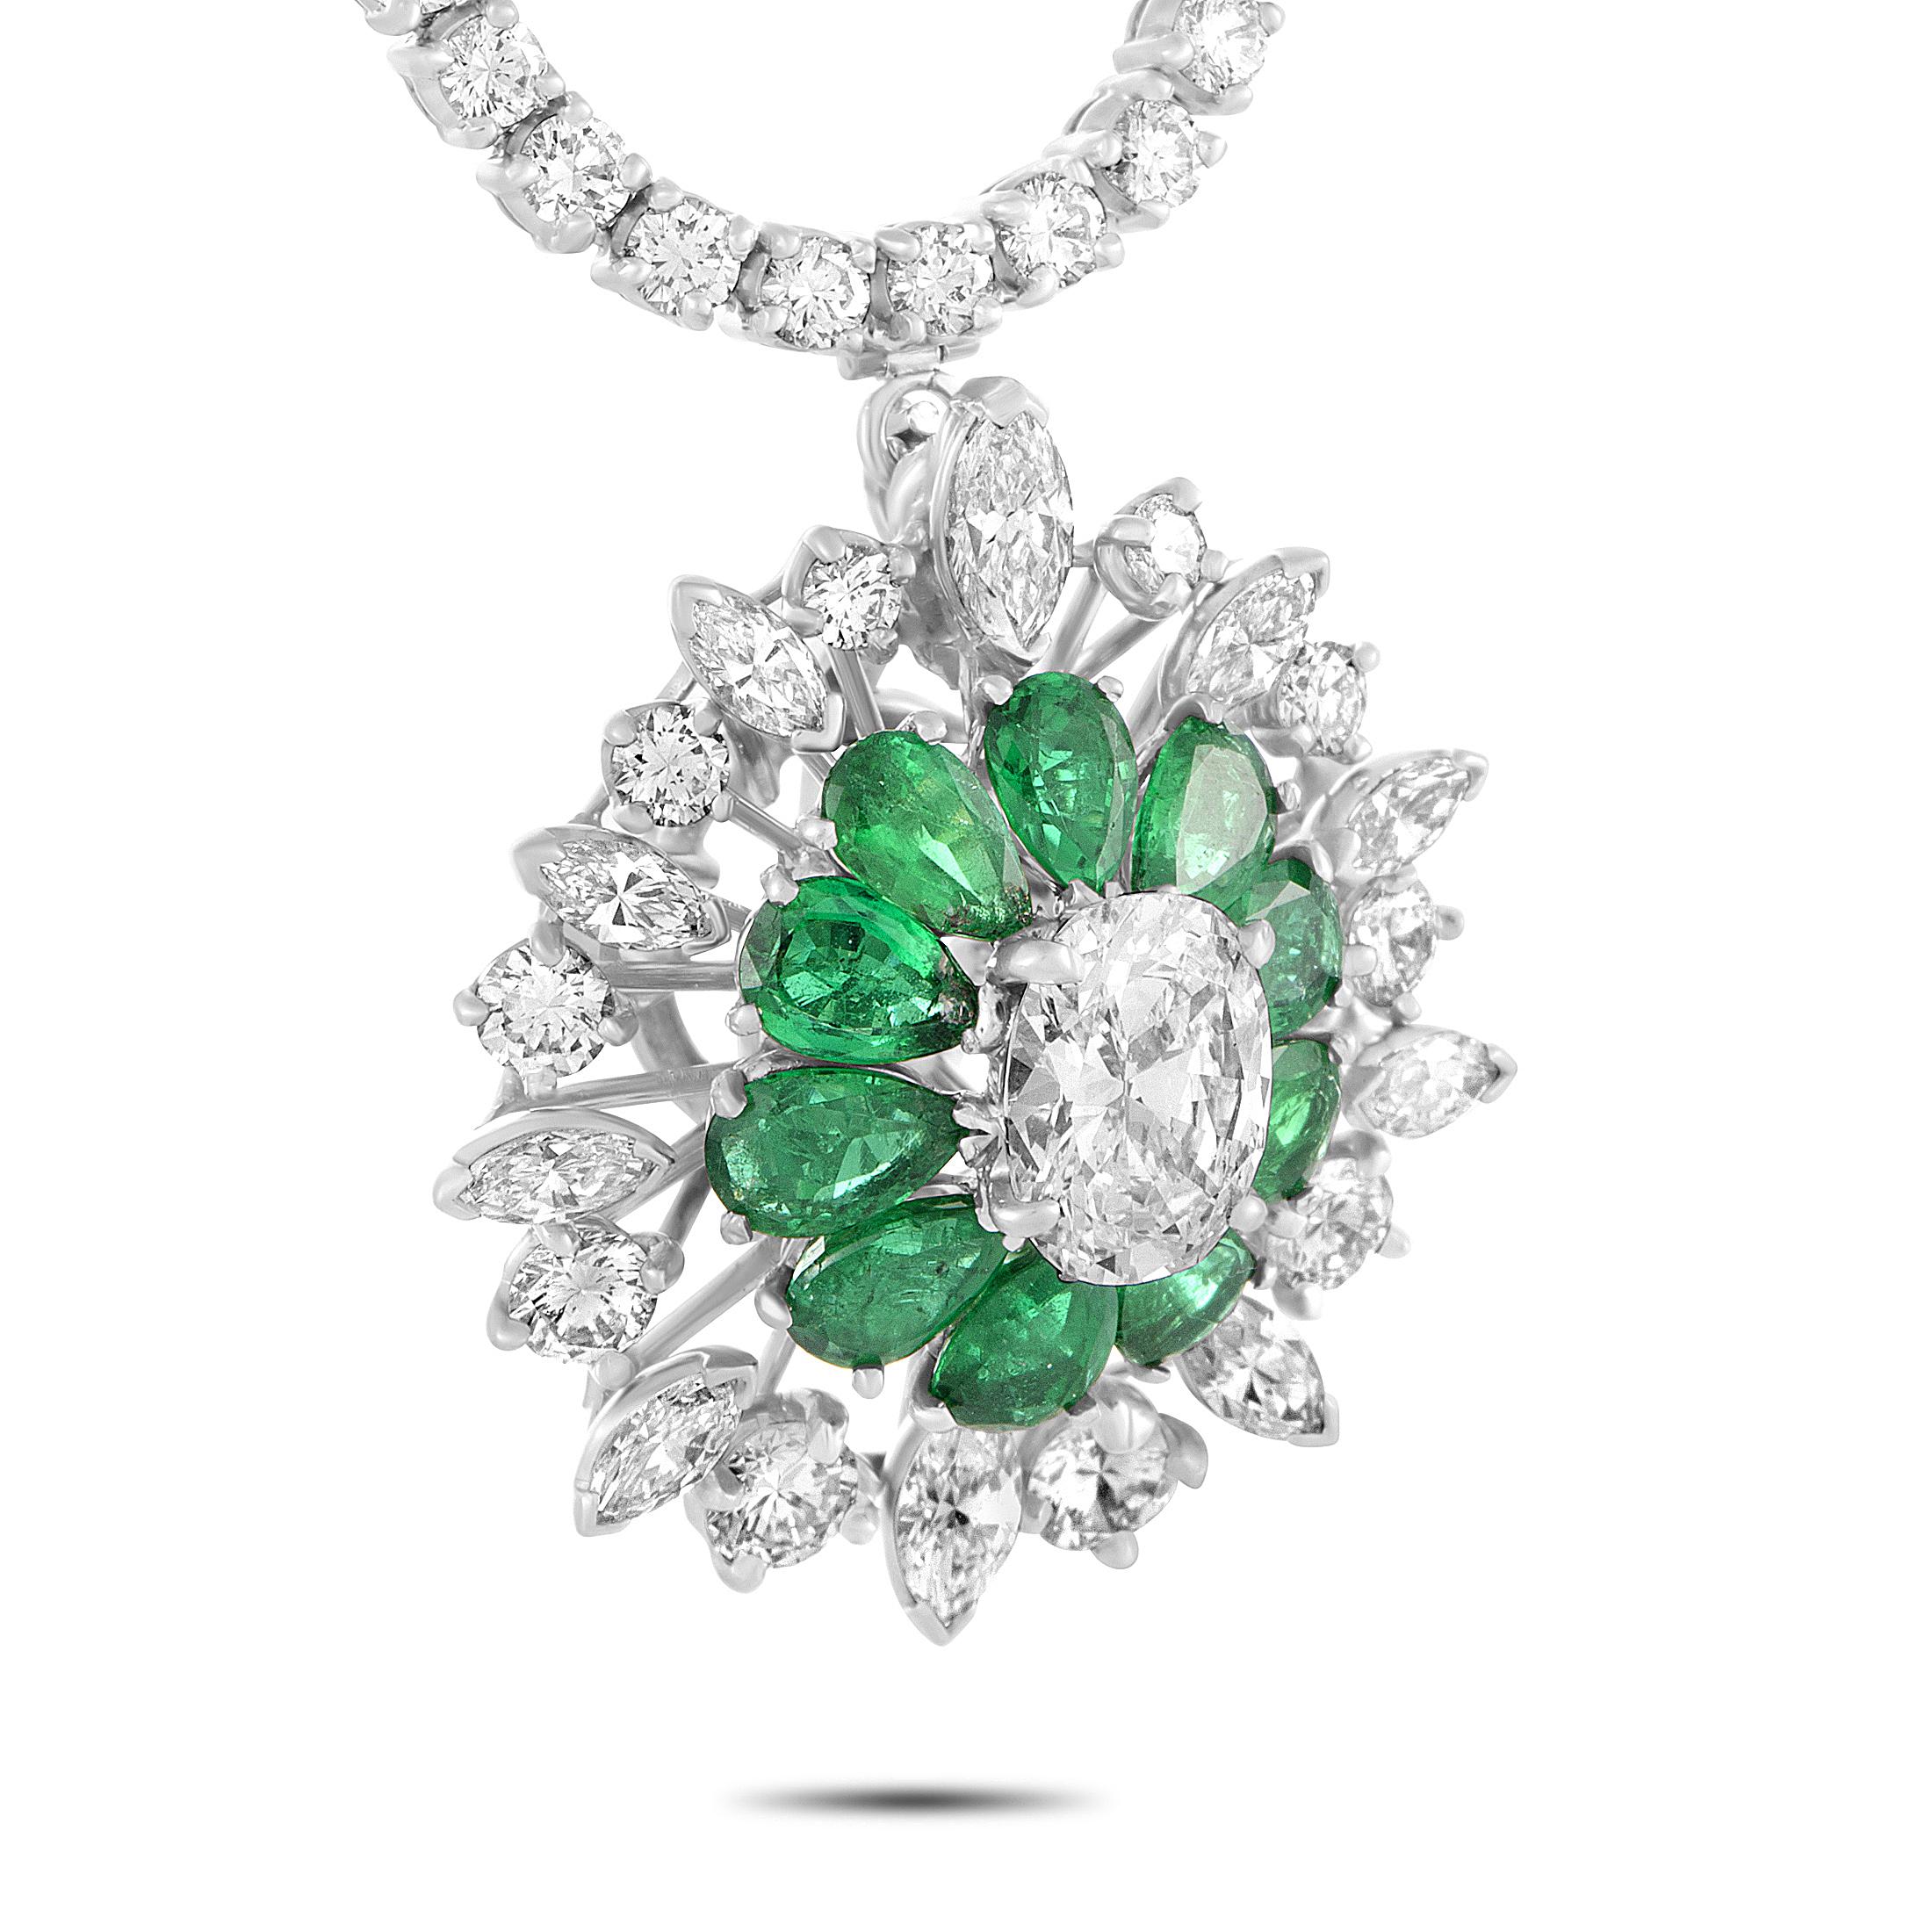 A piece that exudes class and prestige, this extraordinary Oscar Heyman necklace is presented in elegant platinum and luxuriously embellished with scintillating diamonds and regal emeralds. The emeralds amount to 5.00 carats, the center diamond